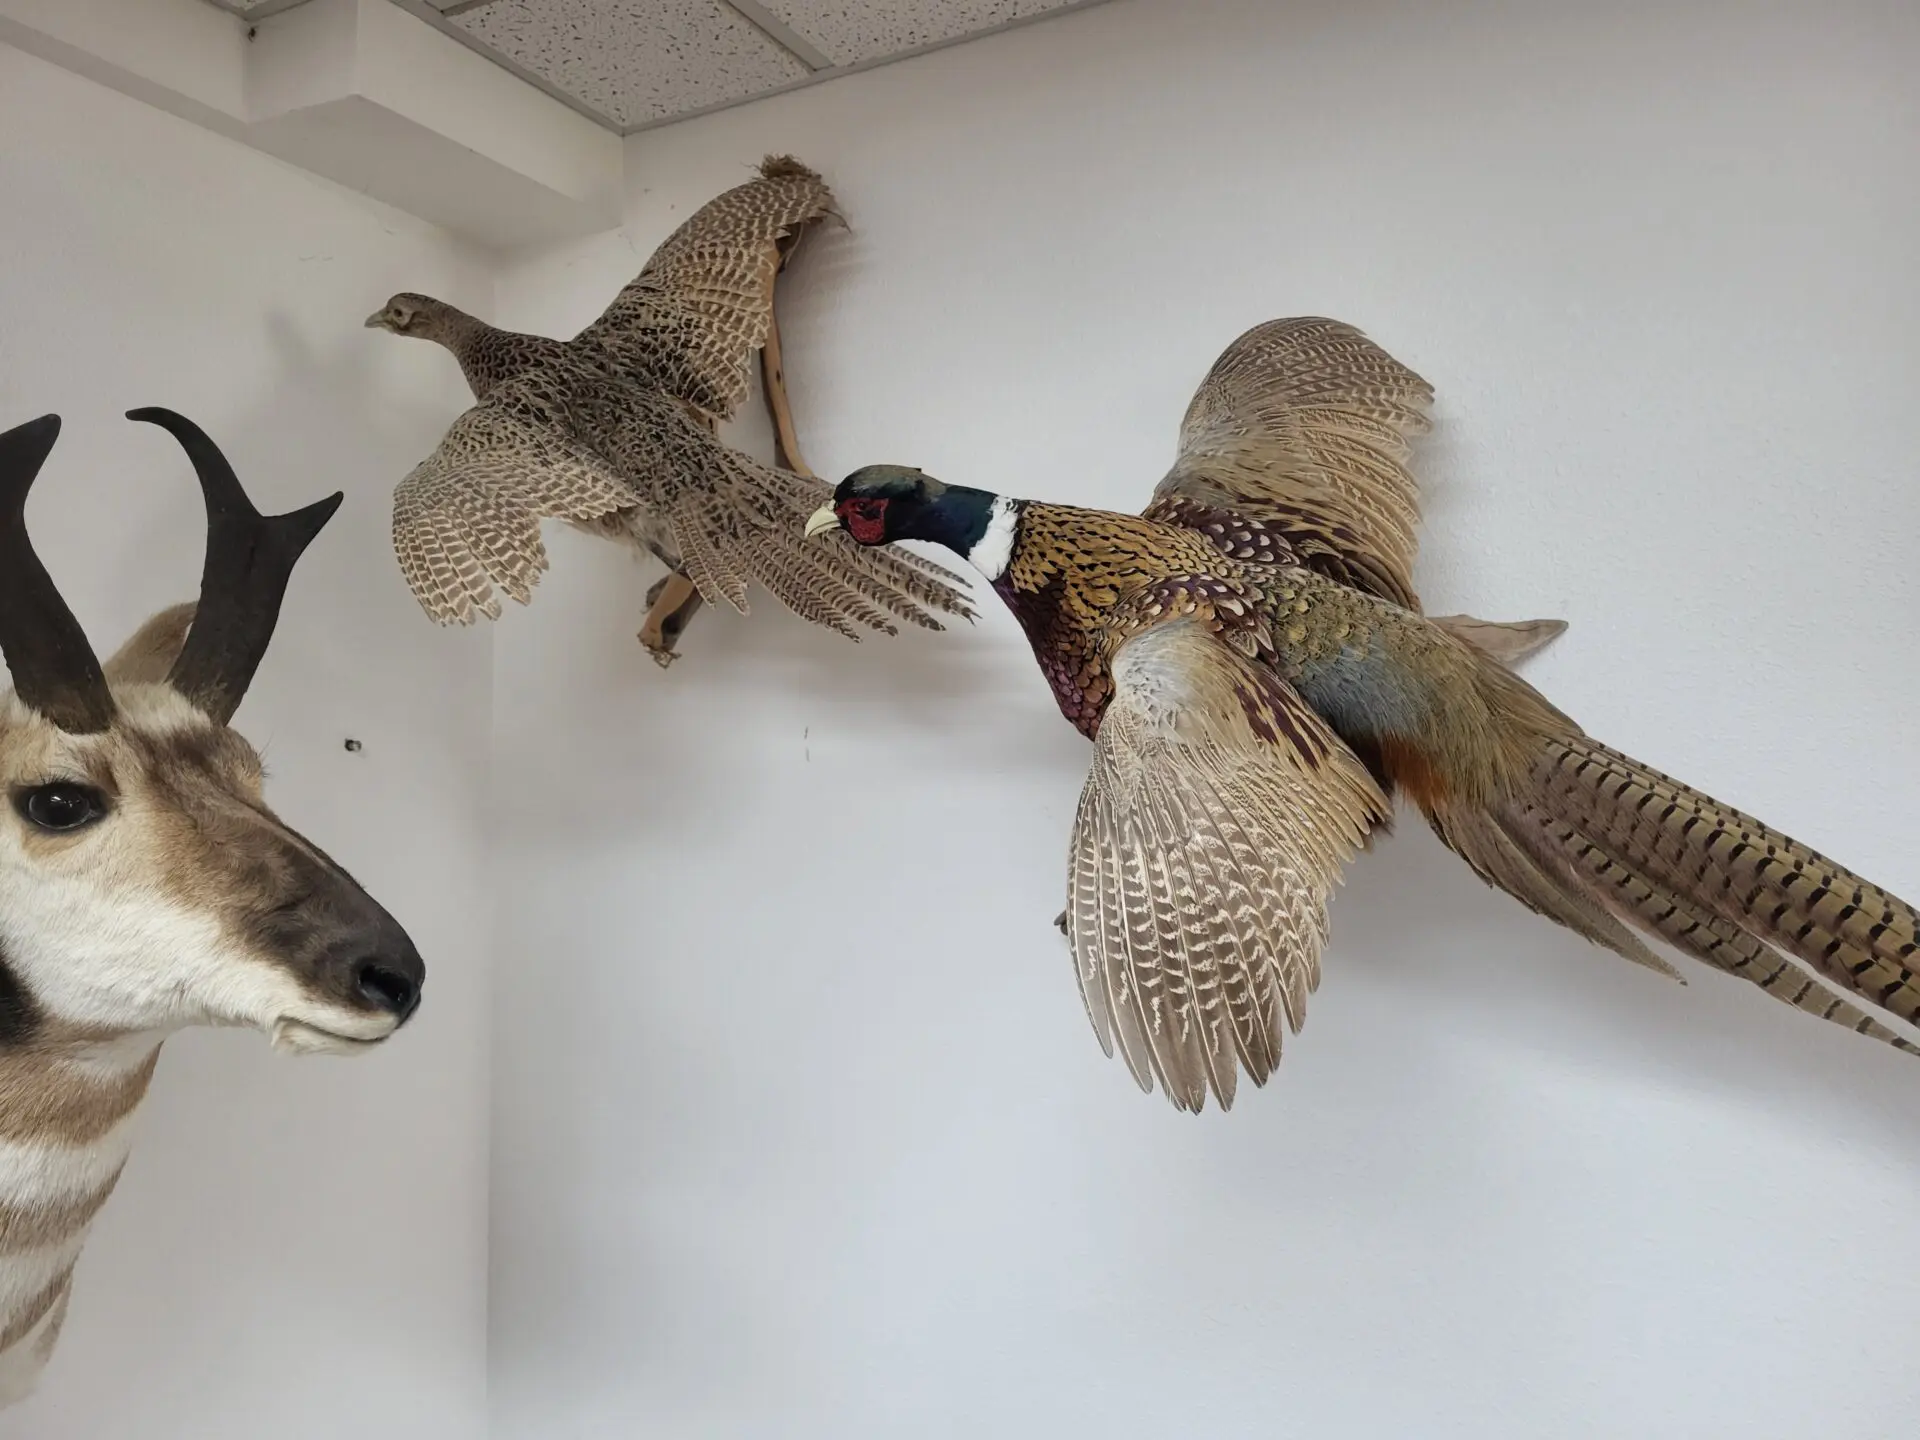 Range of Bird taxidermy is available for sale